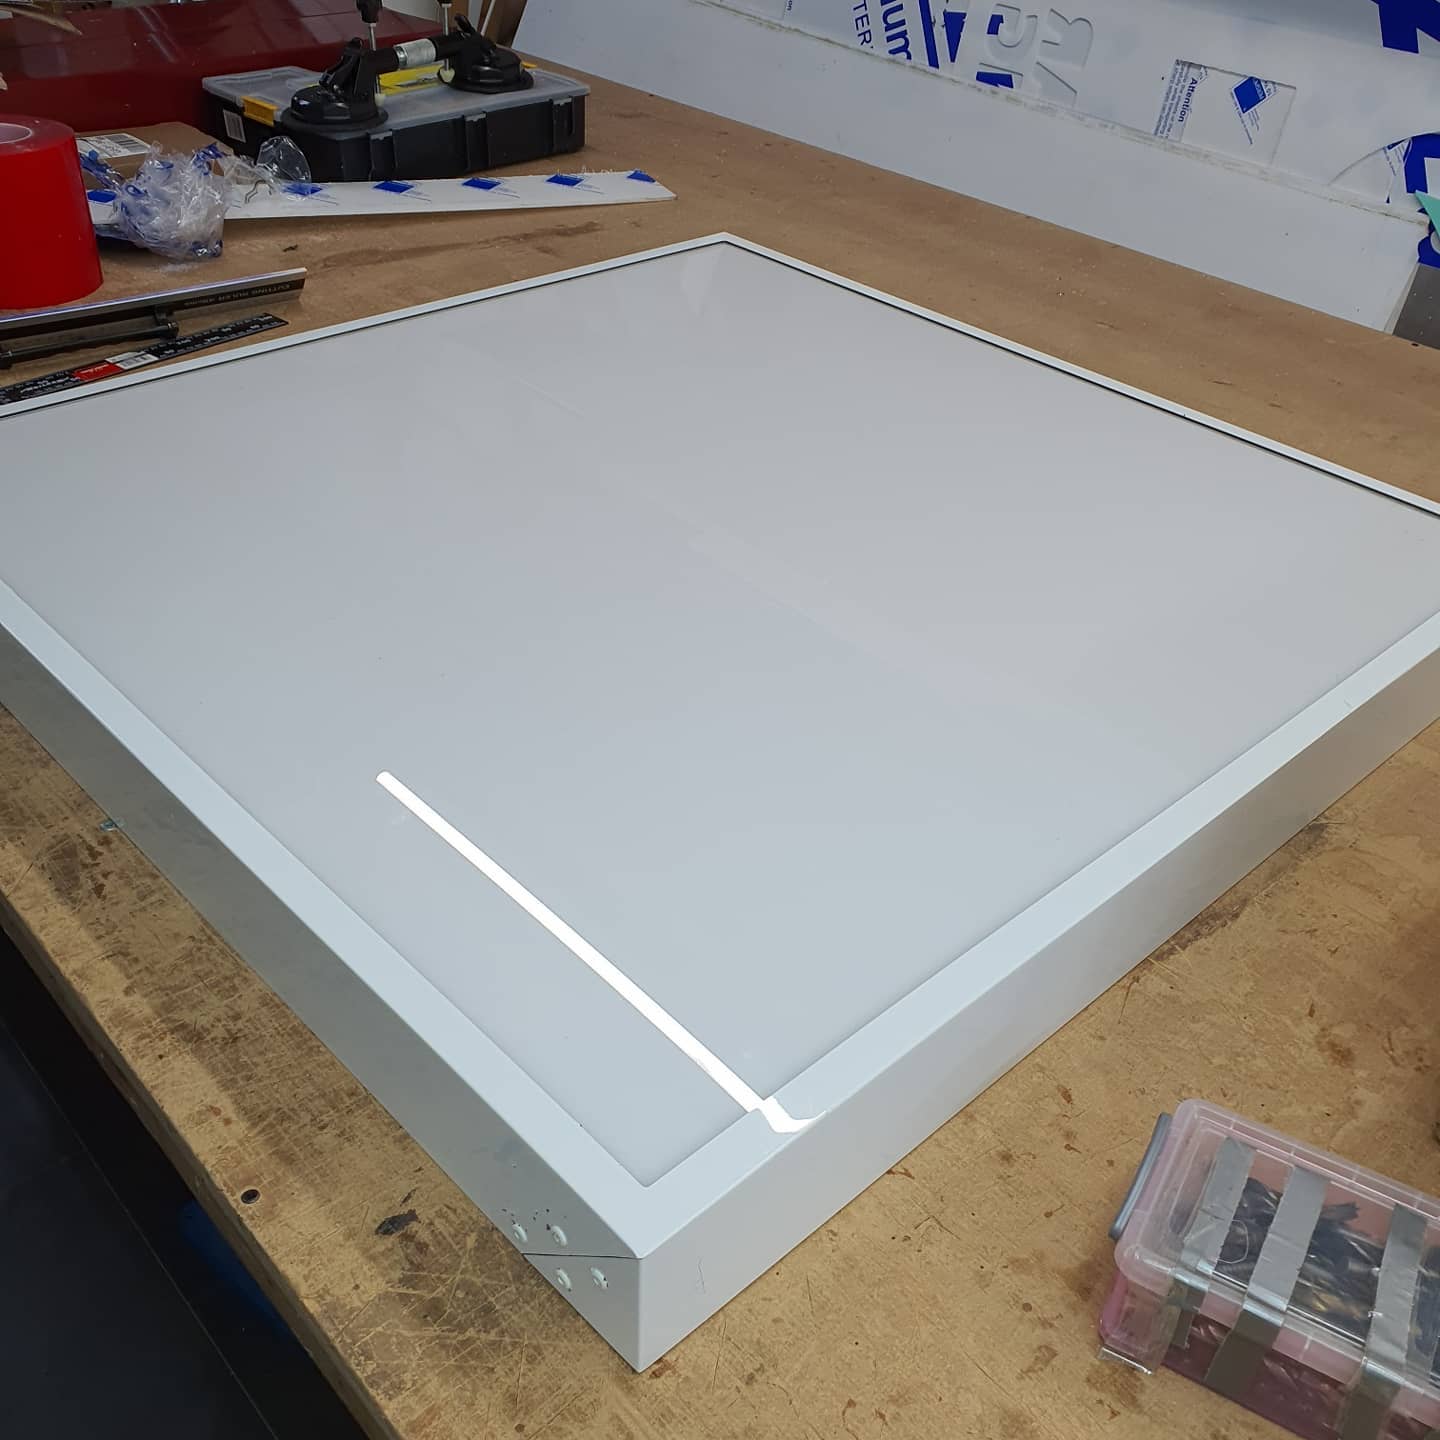 Tray light box. Watch this space.

To place an order  If at all possible PLEASE whatsapp me on 07702153393